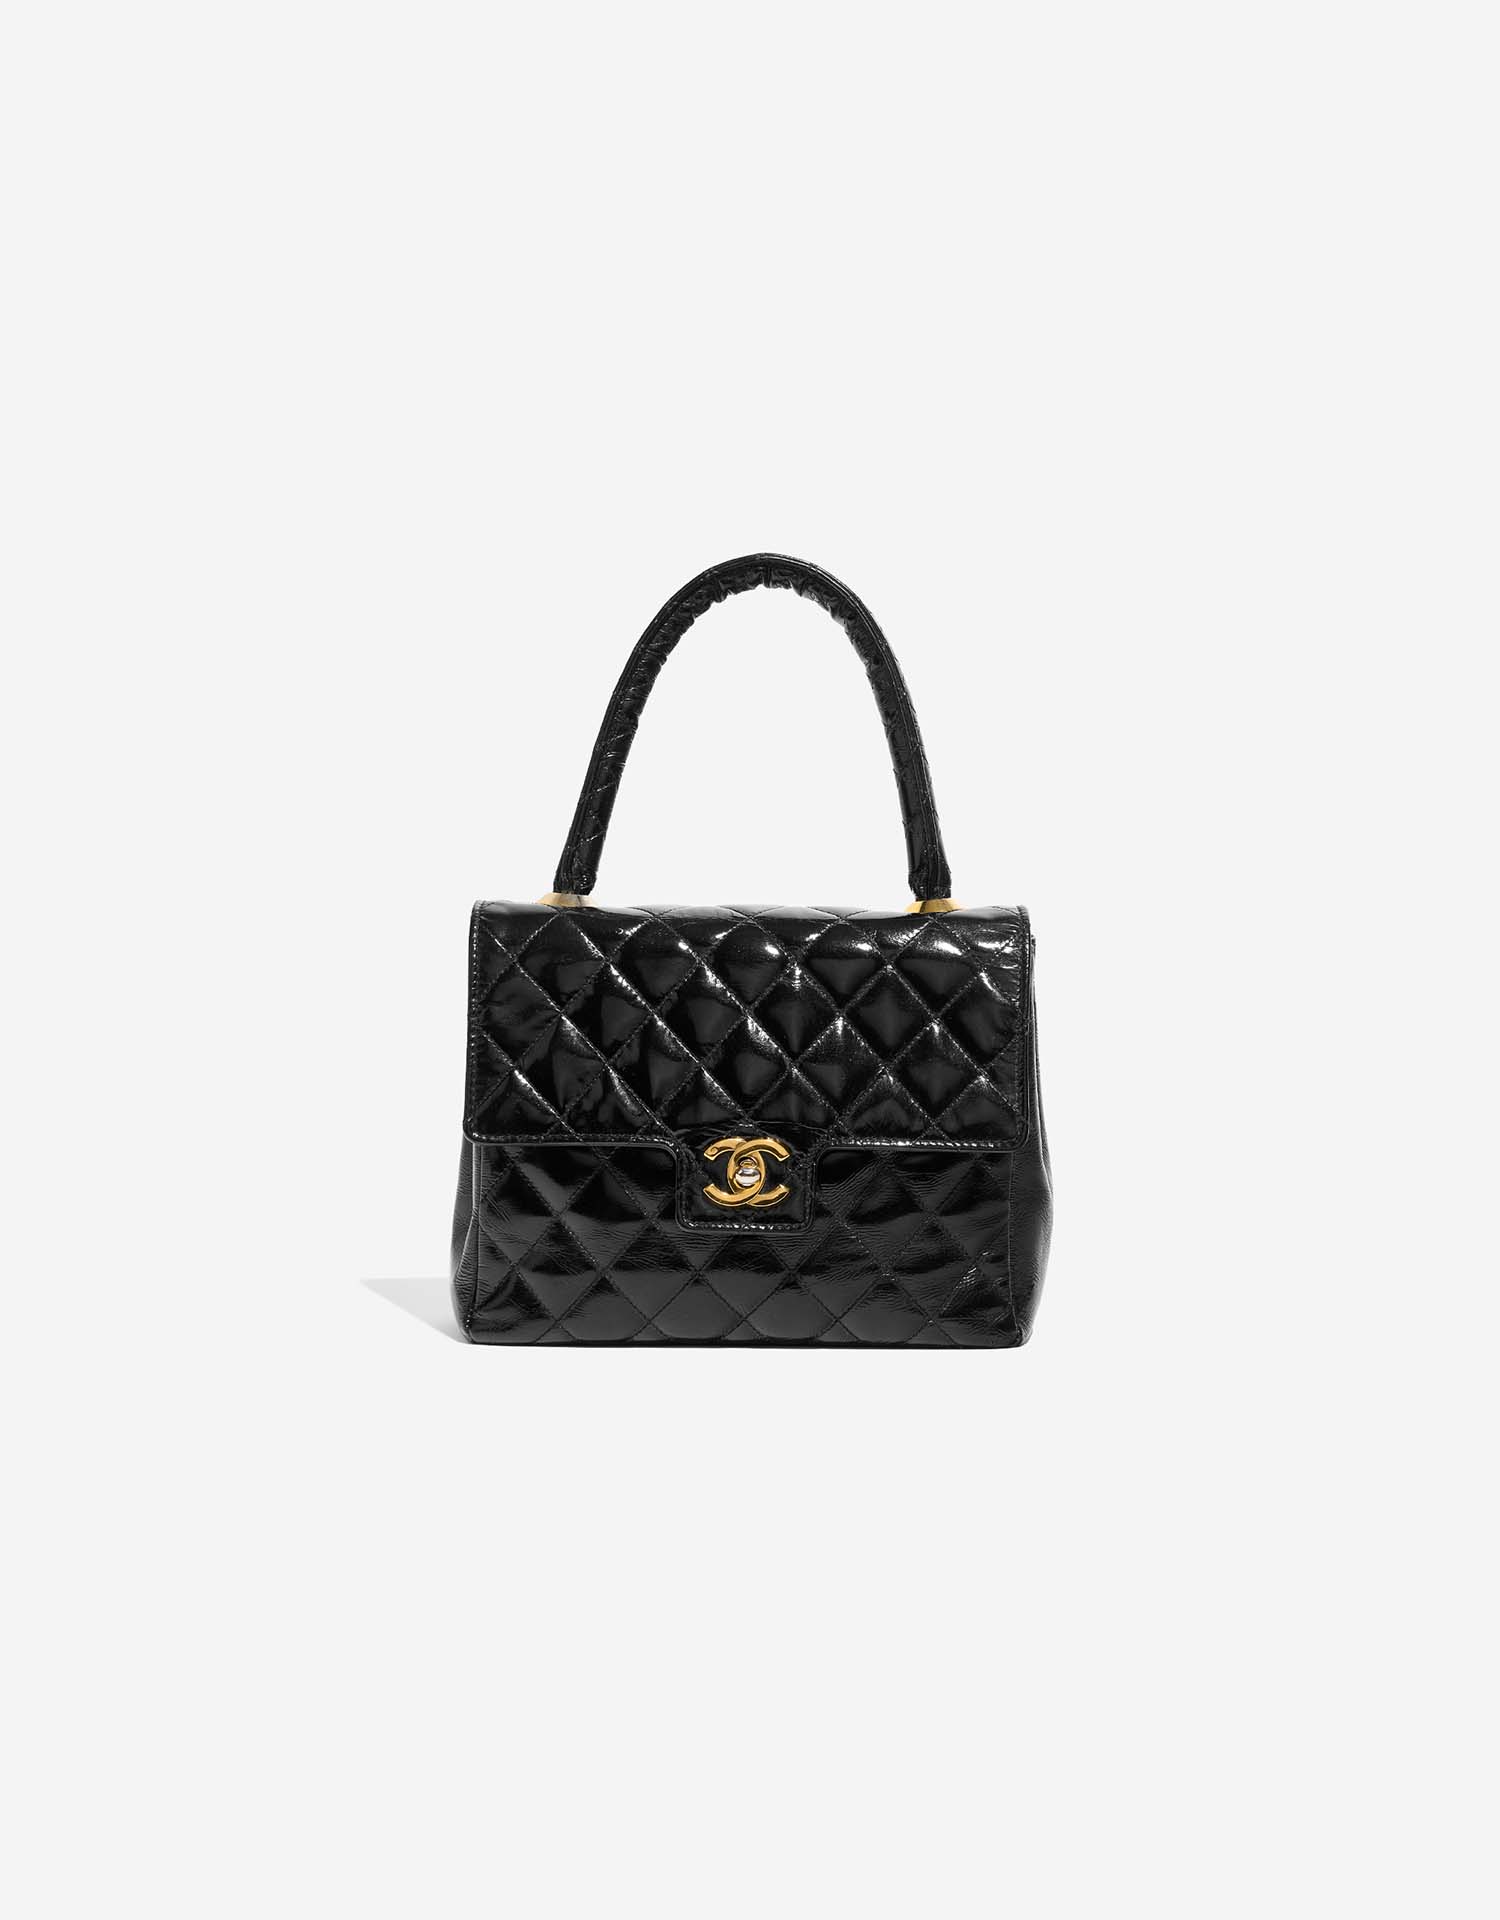 What is the best place that offers Chanel handbags for sale online? - Quora